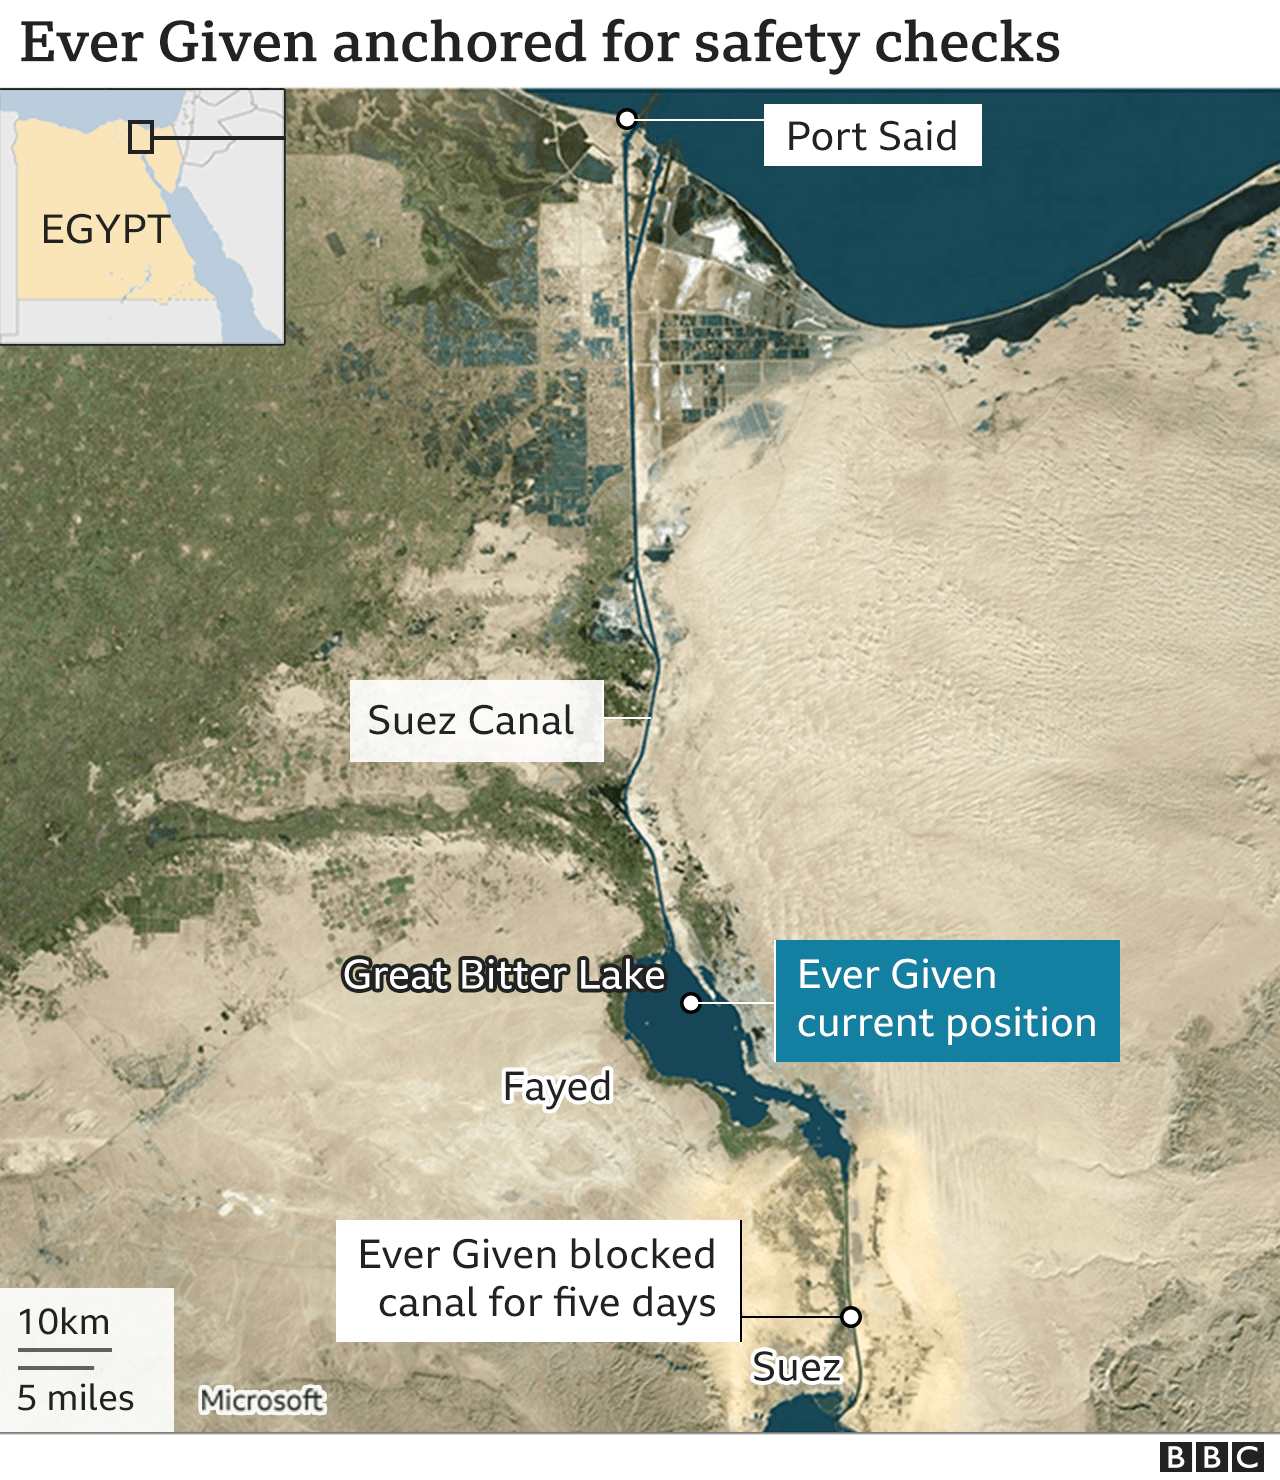 Map showing Suez Canal and location of Ever Given in the Great Bitter Lake (30 March 2021)